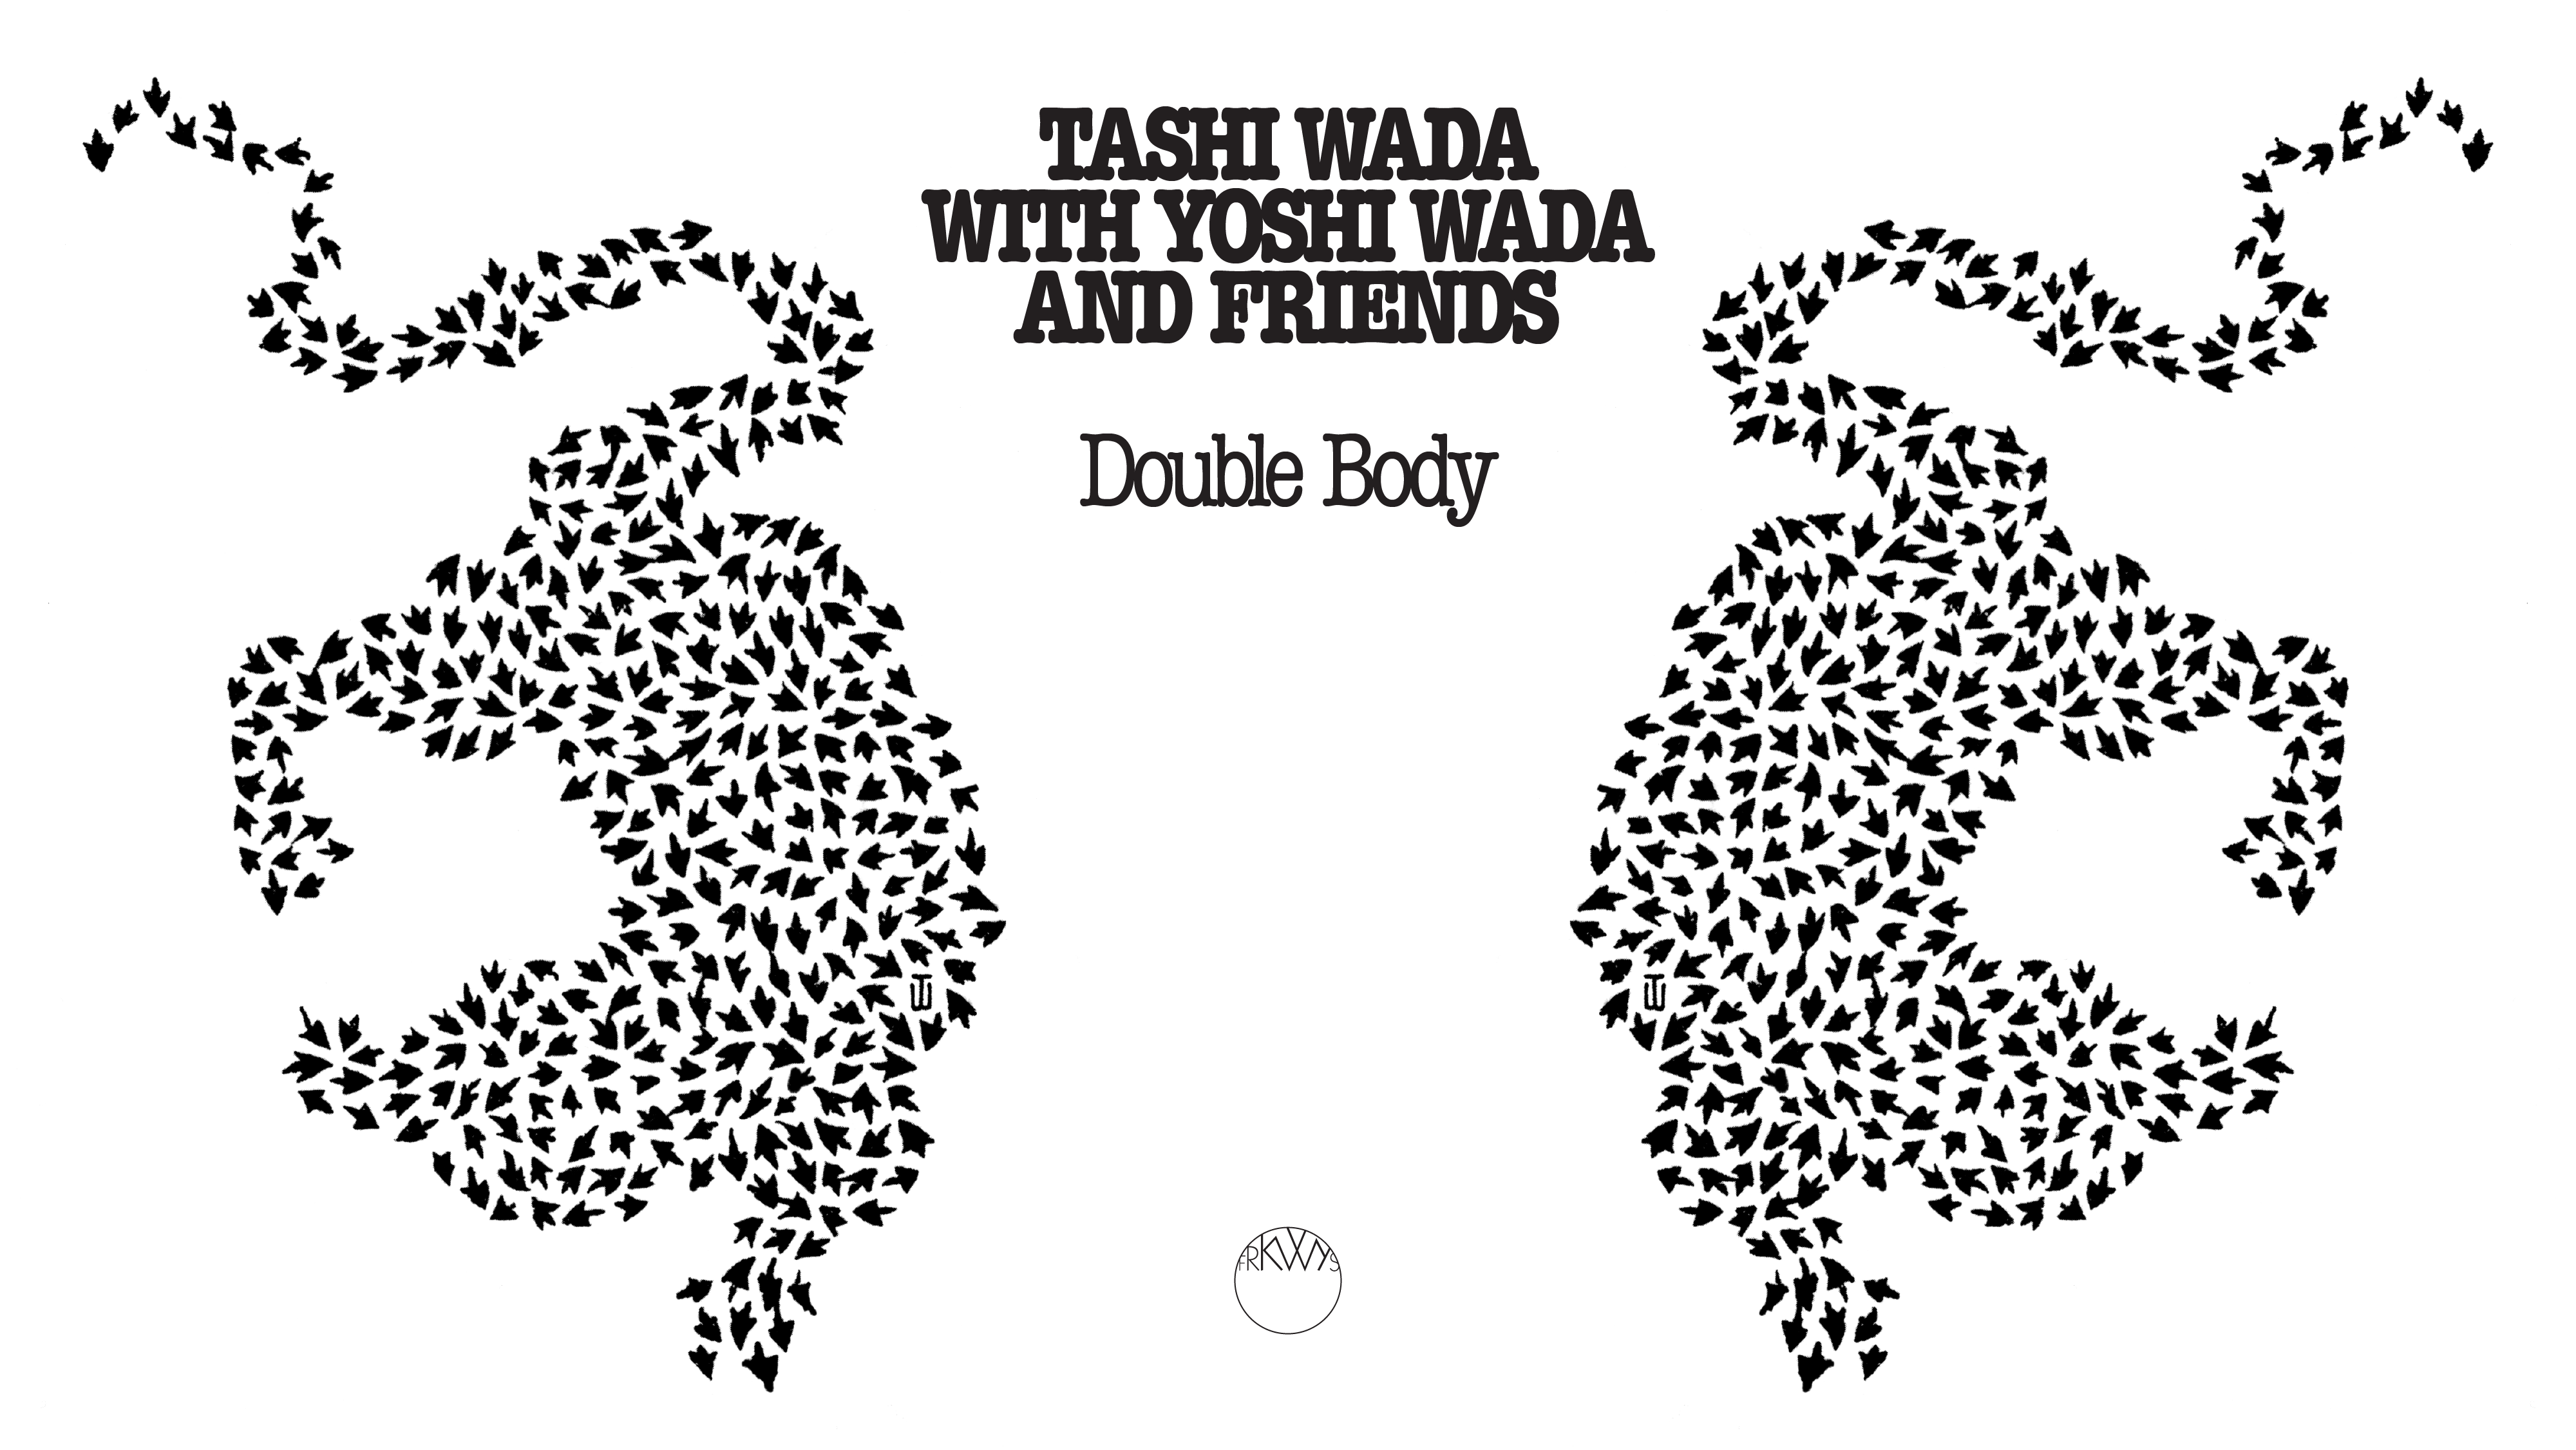 Link to Video for Tashi Wada with Yoshi Wada and Friends – Double Body